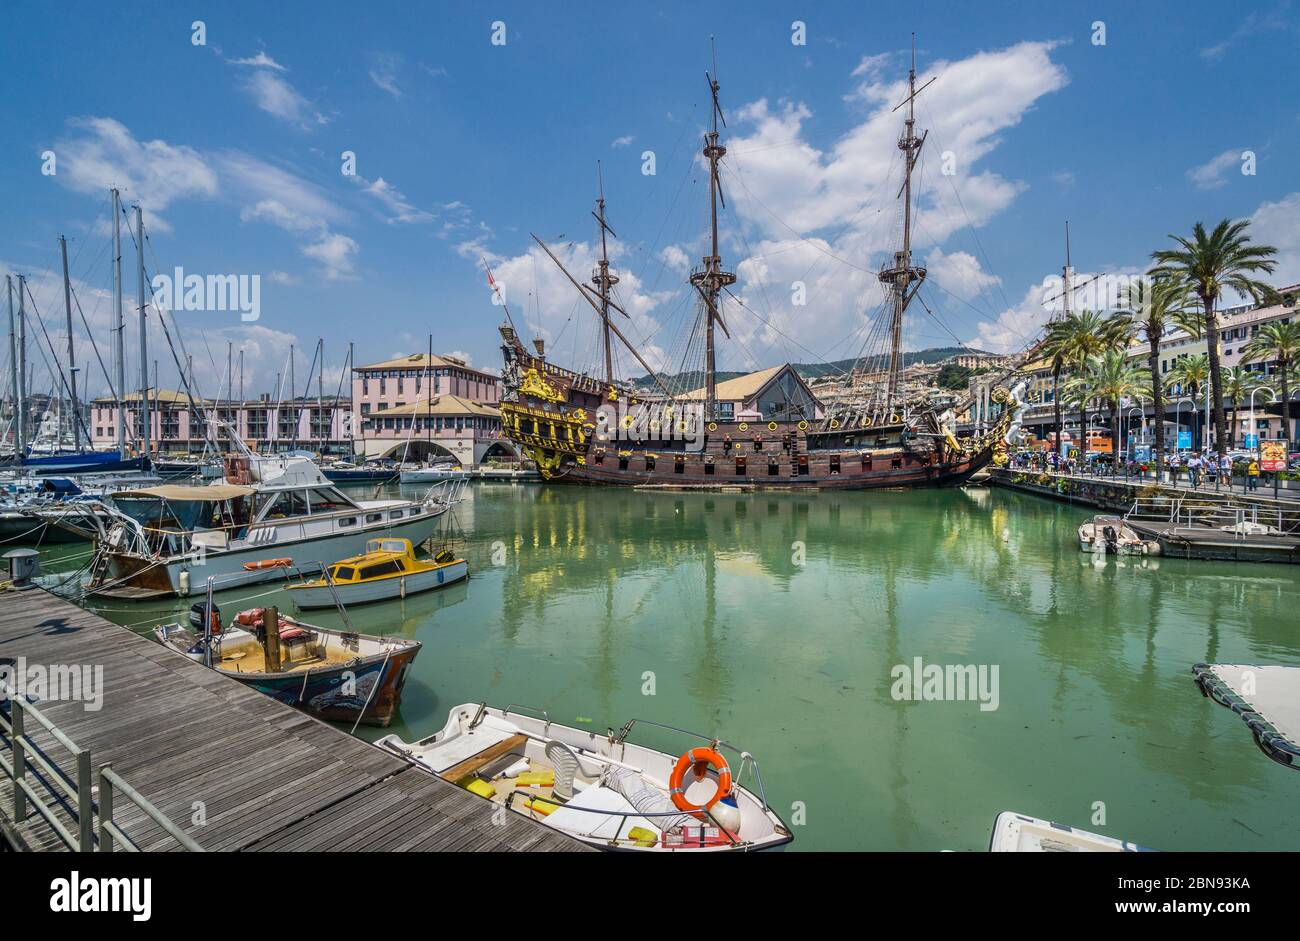 galeon 'Neptune', a replica of a 17th-century Spanish galleon, built for the 1985 film 'Pirates' moored in the Old Harbour of Genoa, Liguria, Italy Stock Photo